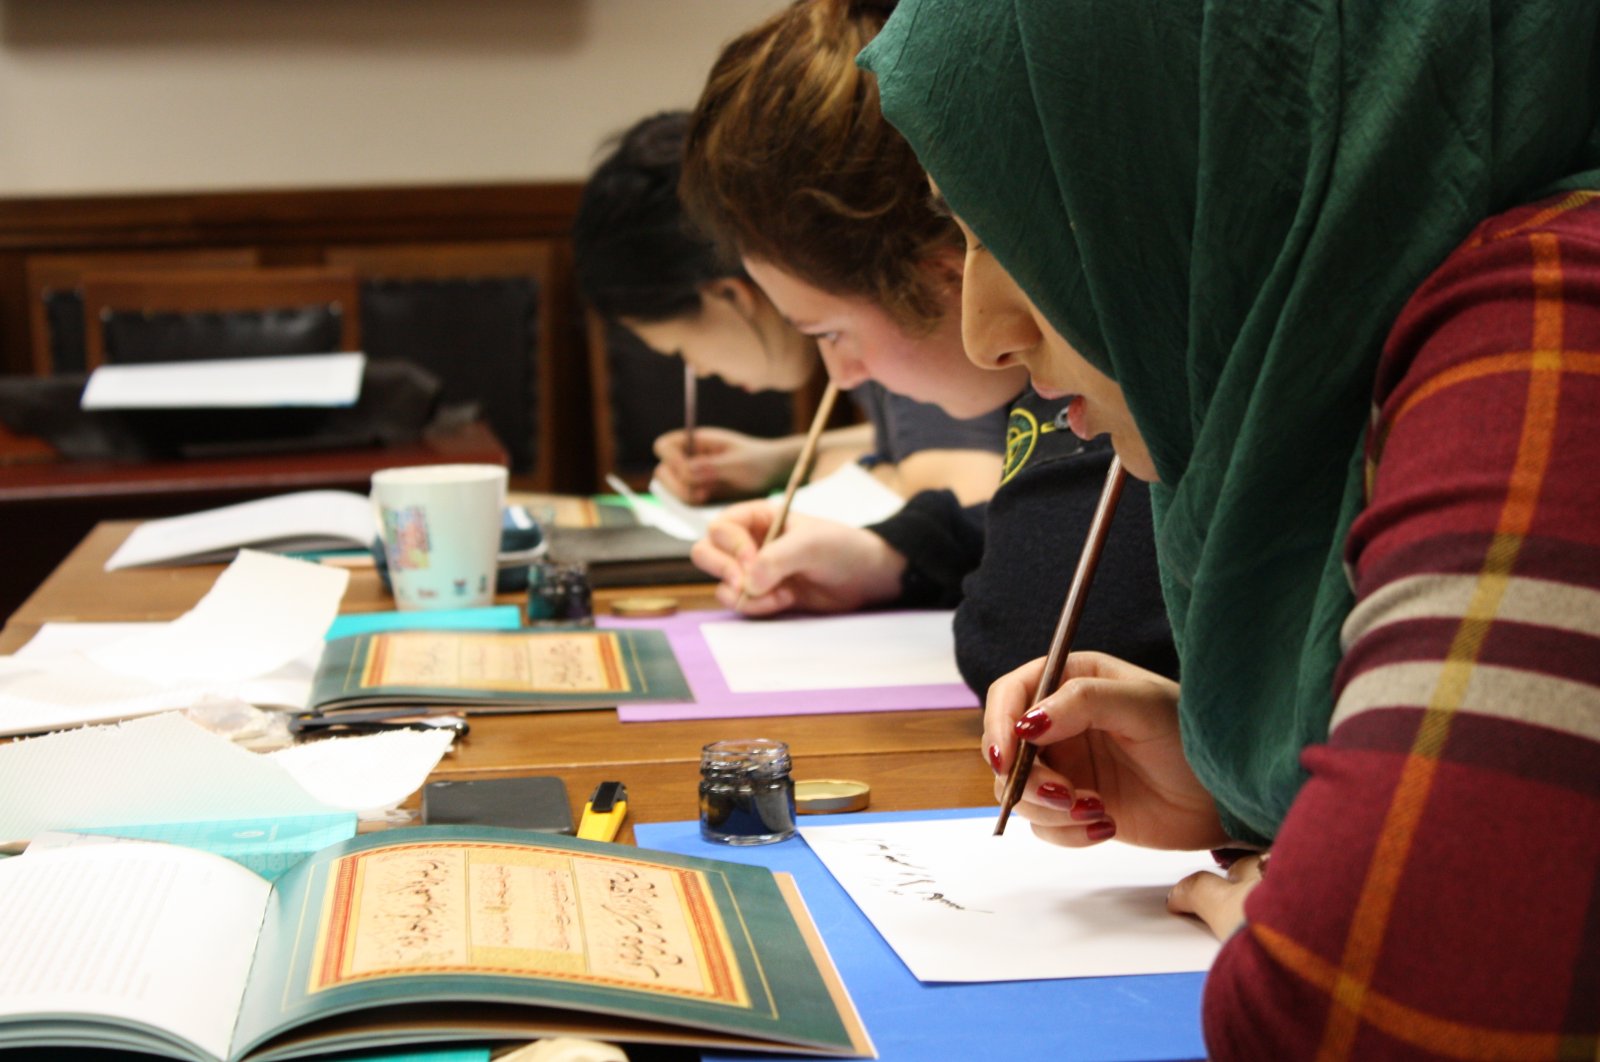 Students practice the art of calligraphy at the Yunus Emre Institute London, in London, U.K. (Photo courtesy of Yunus Emre Institute)